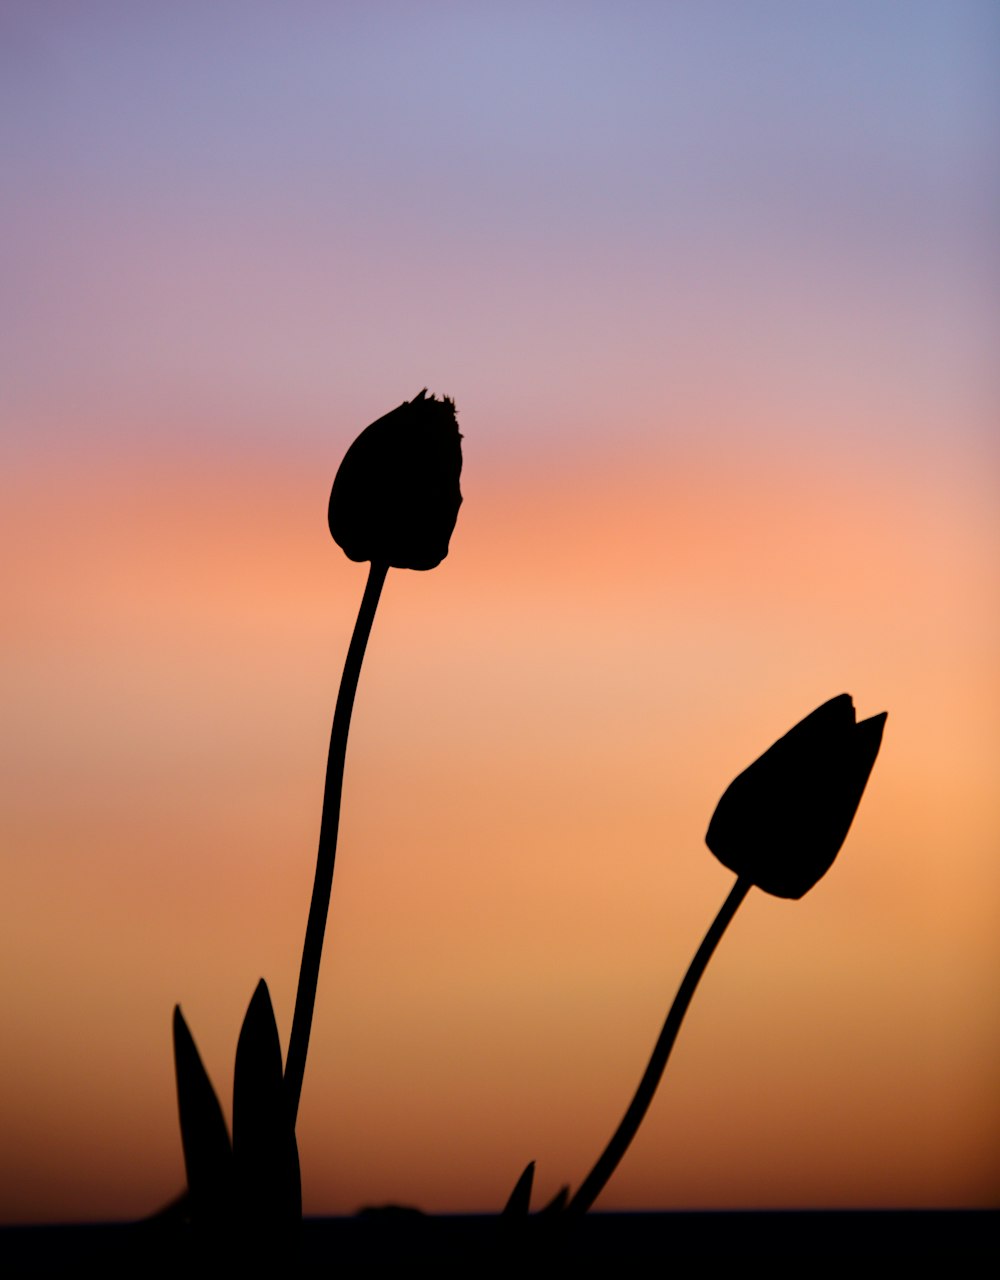 the silhouette of two flowers against a sunset sky